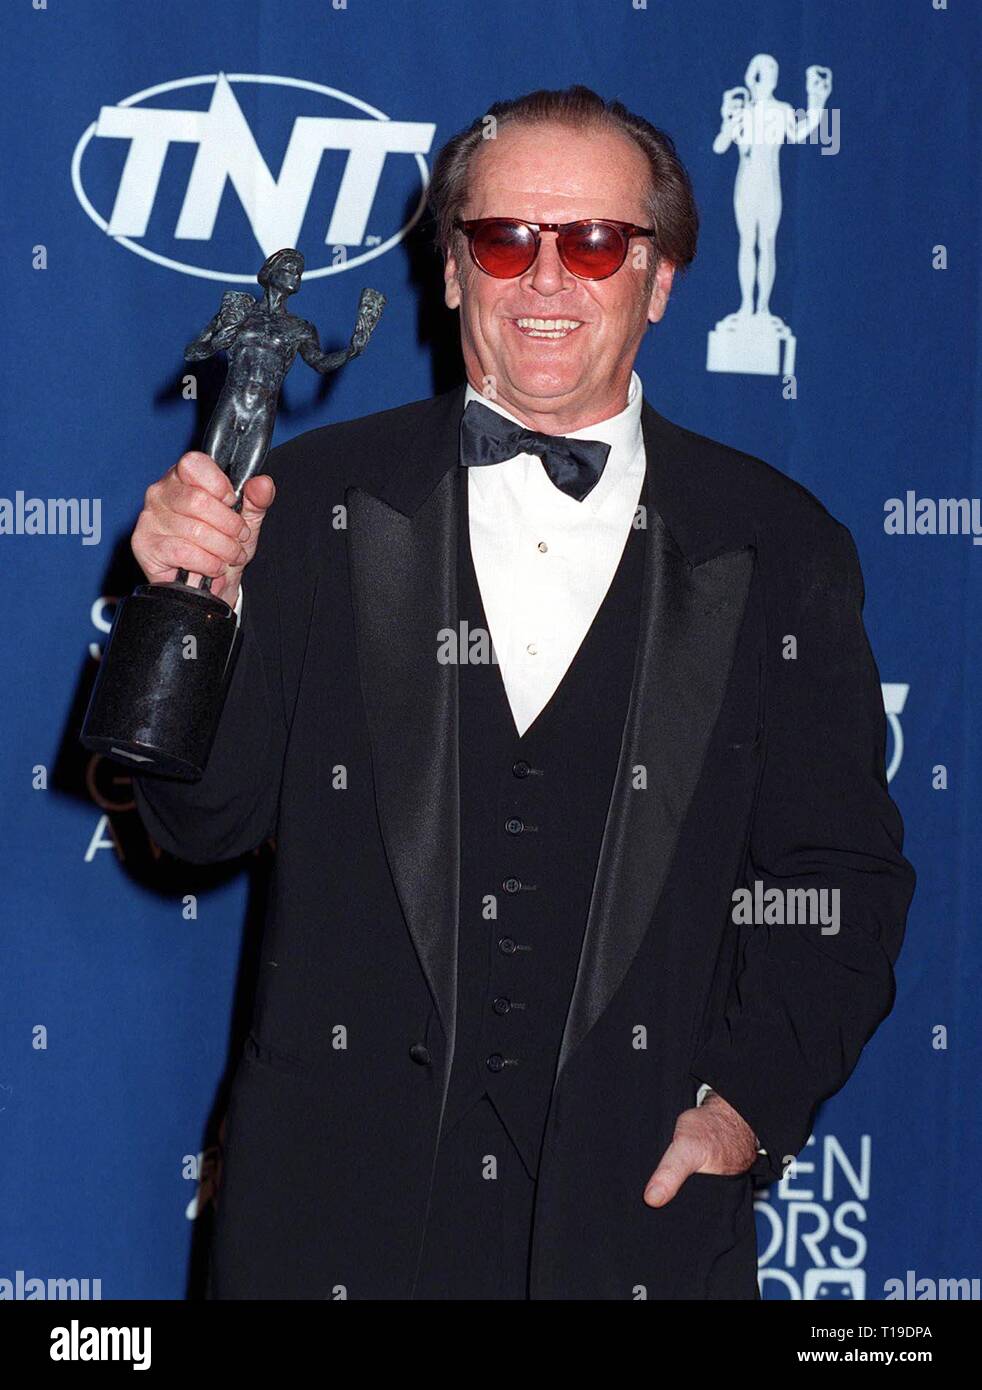 LOS ANGELES, CA - March 8, 1998: Actor JACK NICHOLSON at the Screen Actors Guild Awards in Los Angeles. He won the Best Actor award for 'As Good As It Gets.' Stock Photo